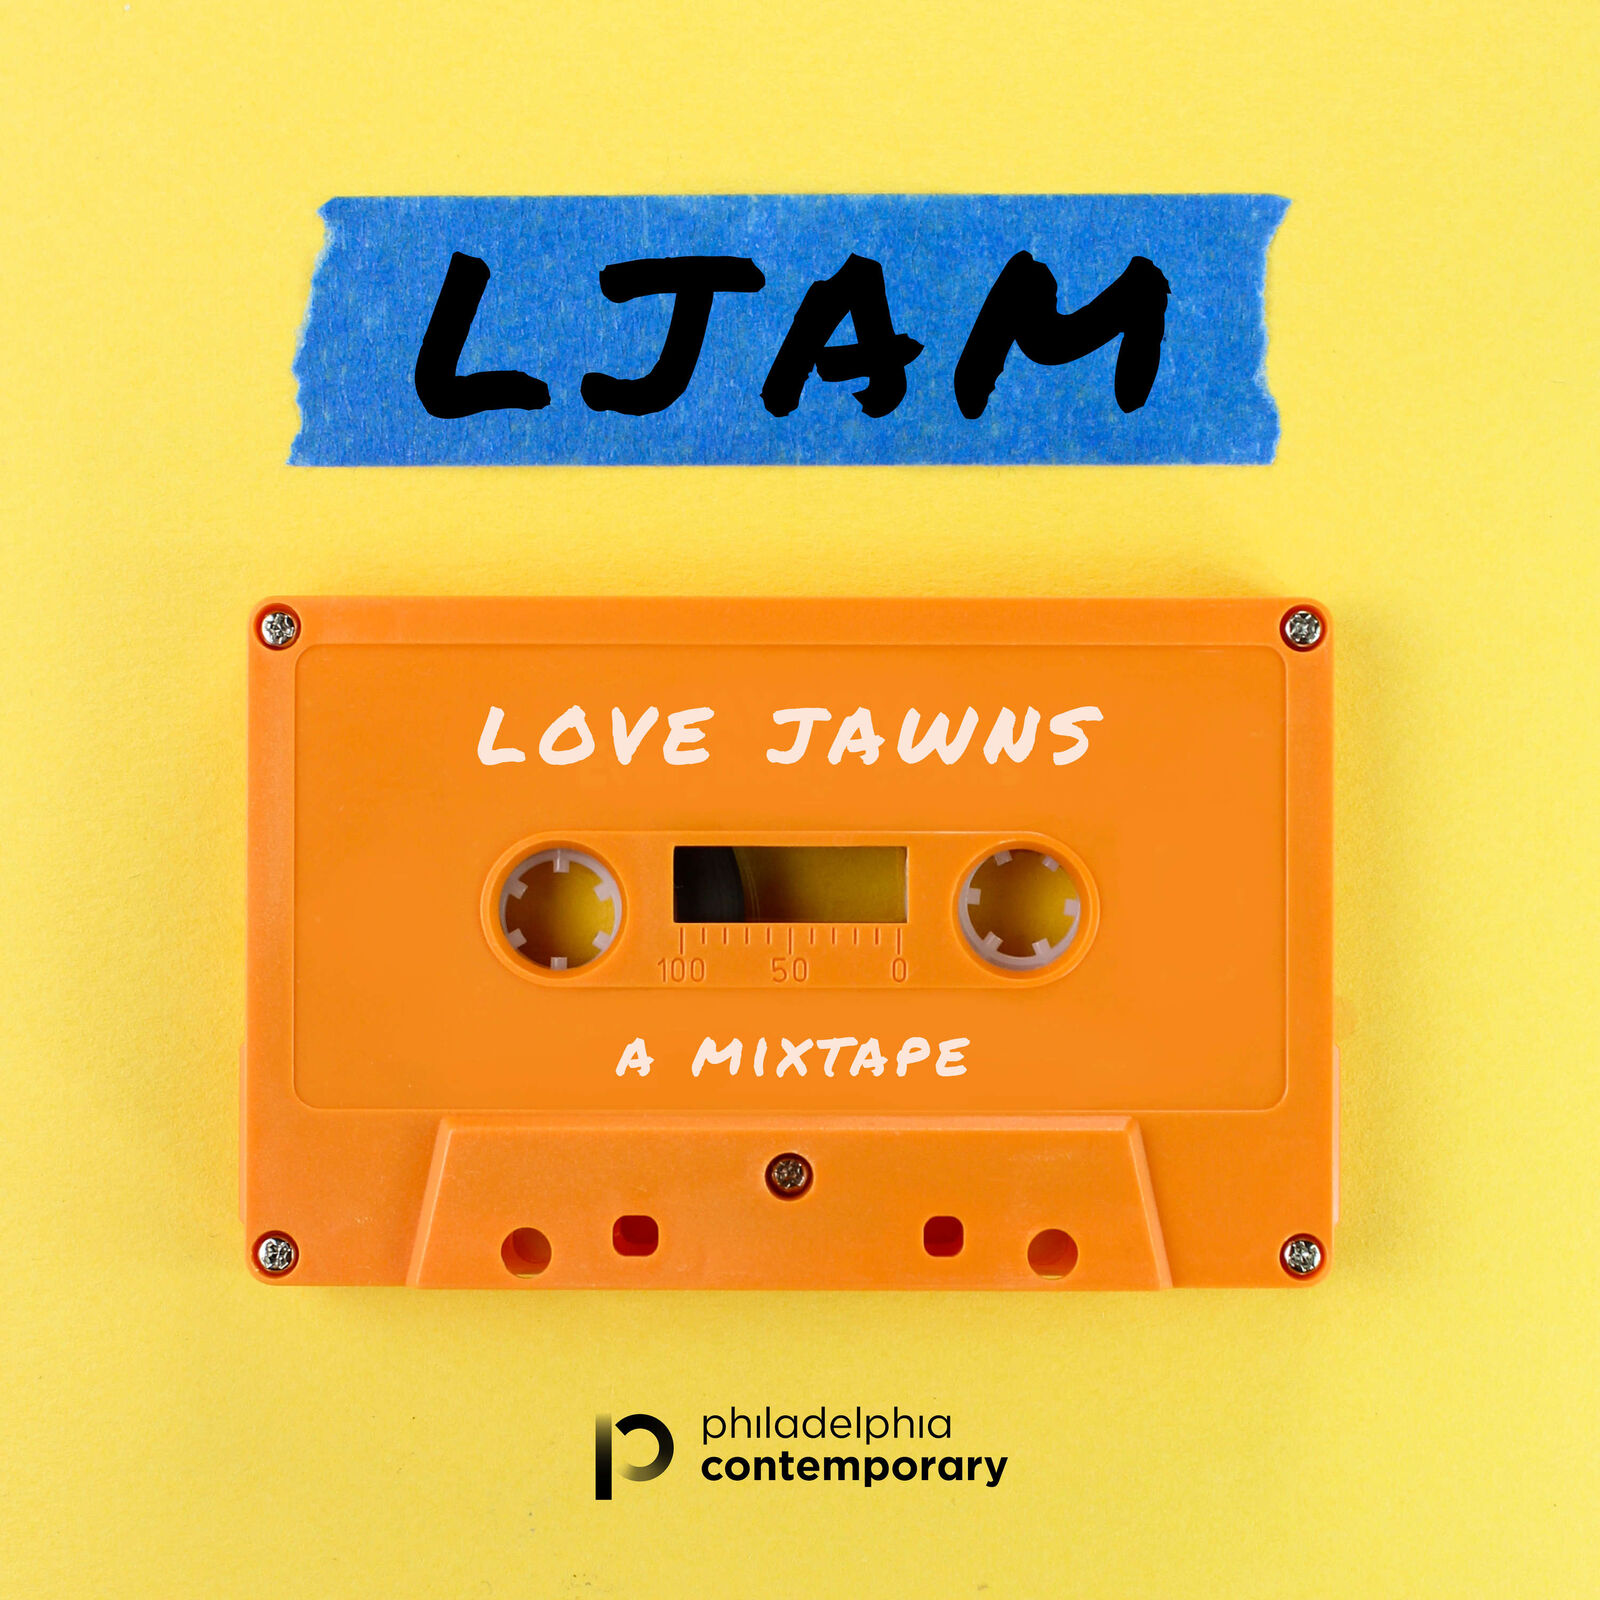 A Love Jawns podcast cover that says "LJAM, Love Jawns, A Mixtape" and has the Philadelphia Contemporary logo at the bottom